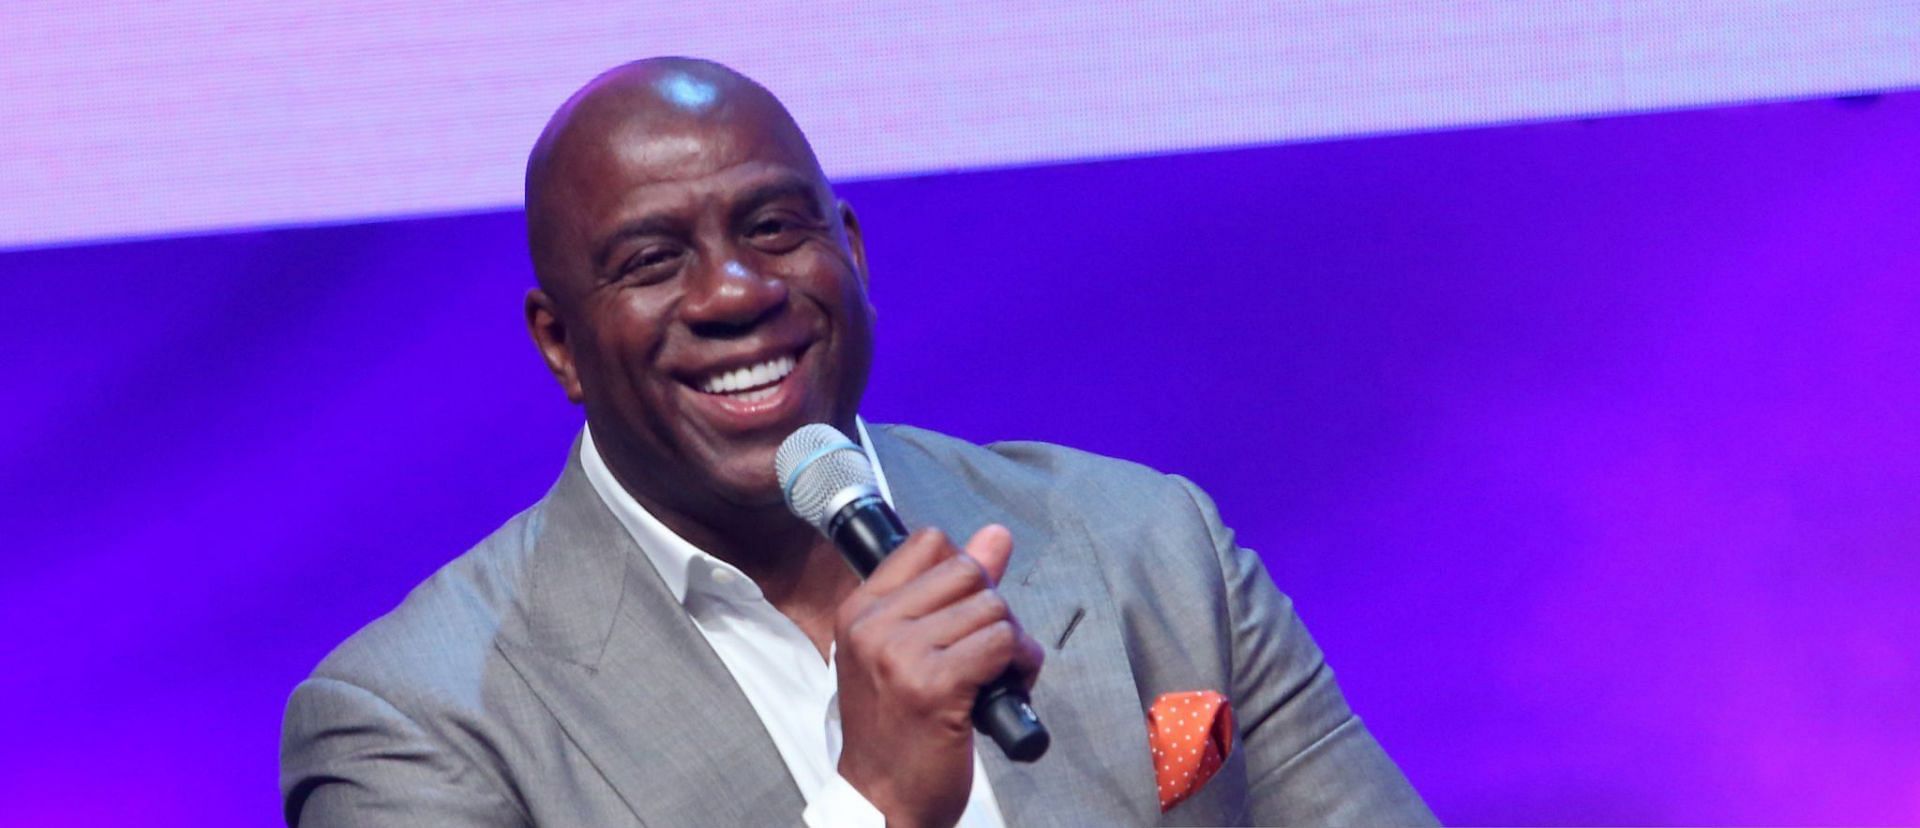 Magic Johnson was diagnosed with HIV in 1991 and has been surviving with the condition for 31 years (Image via Getty Images)